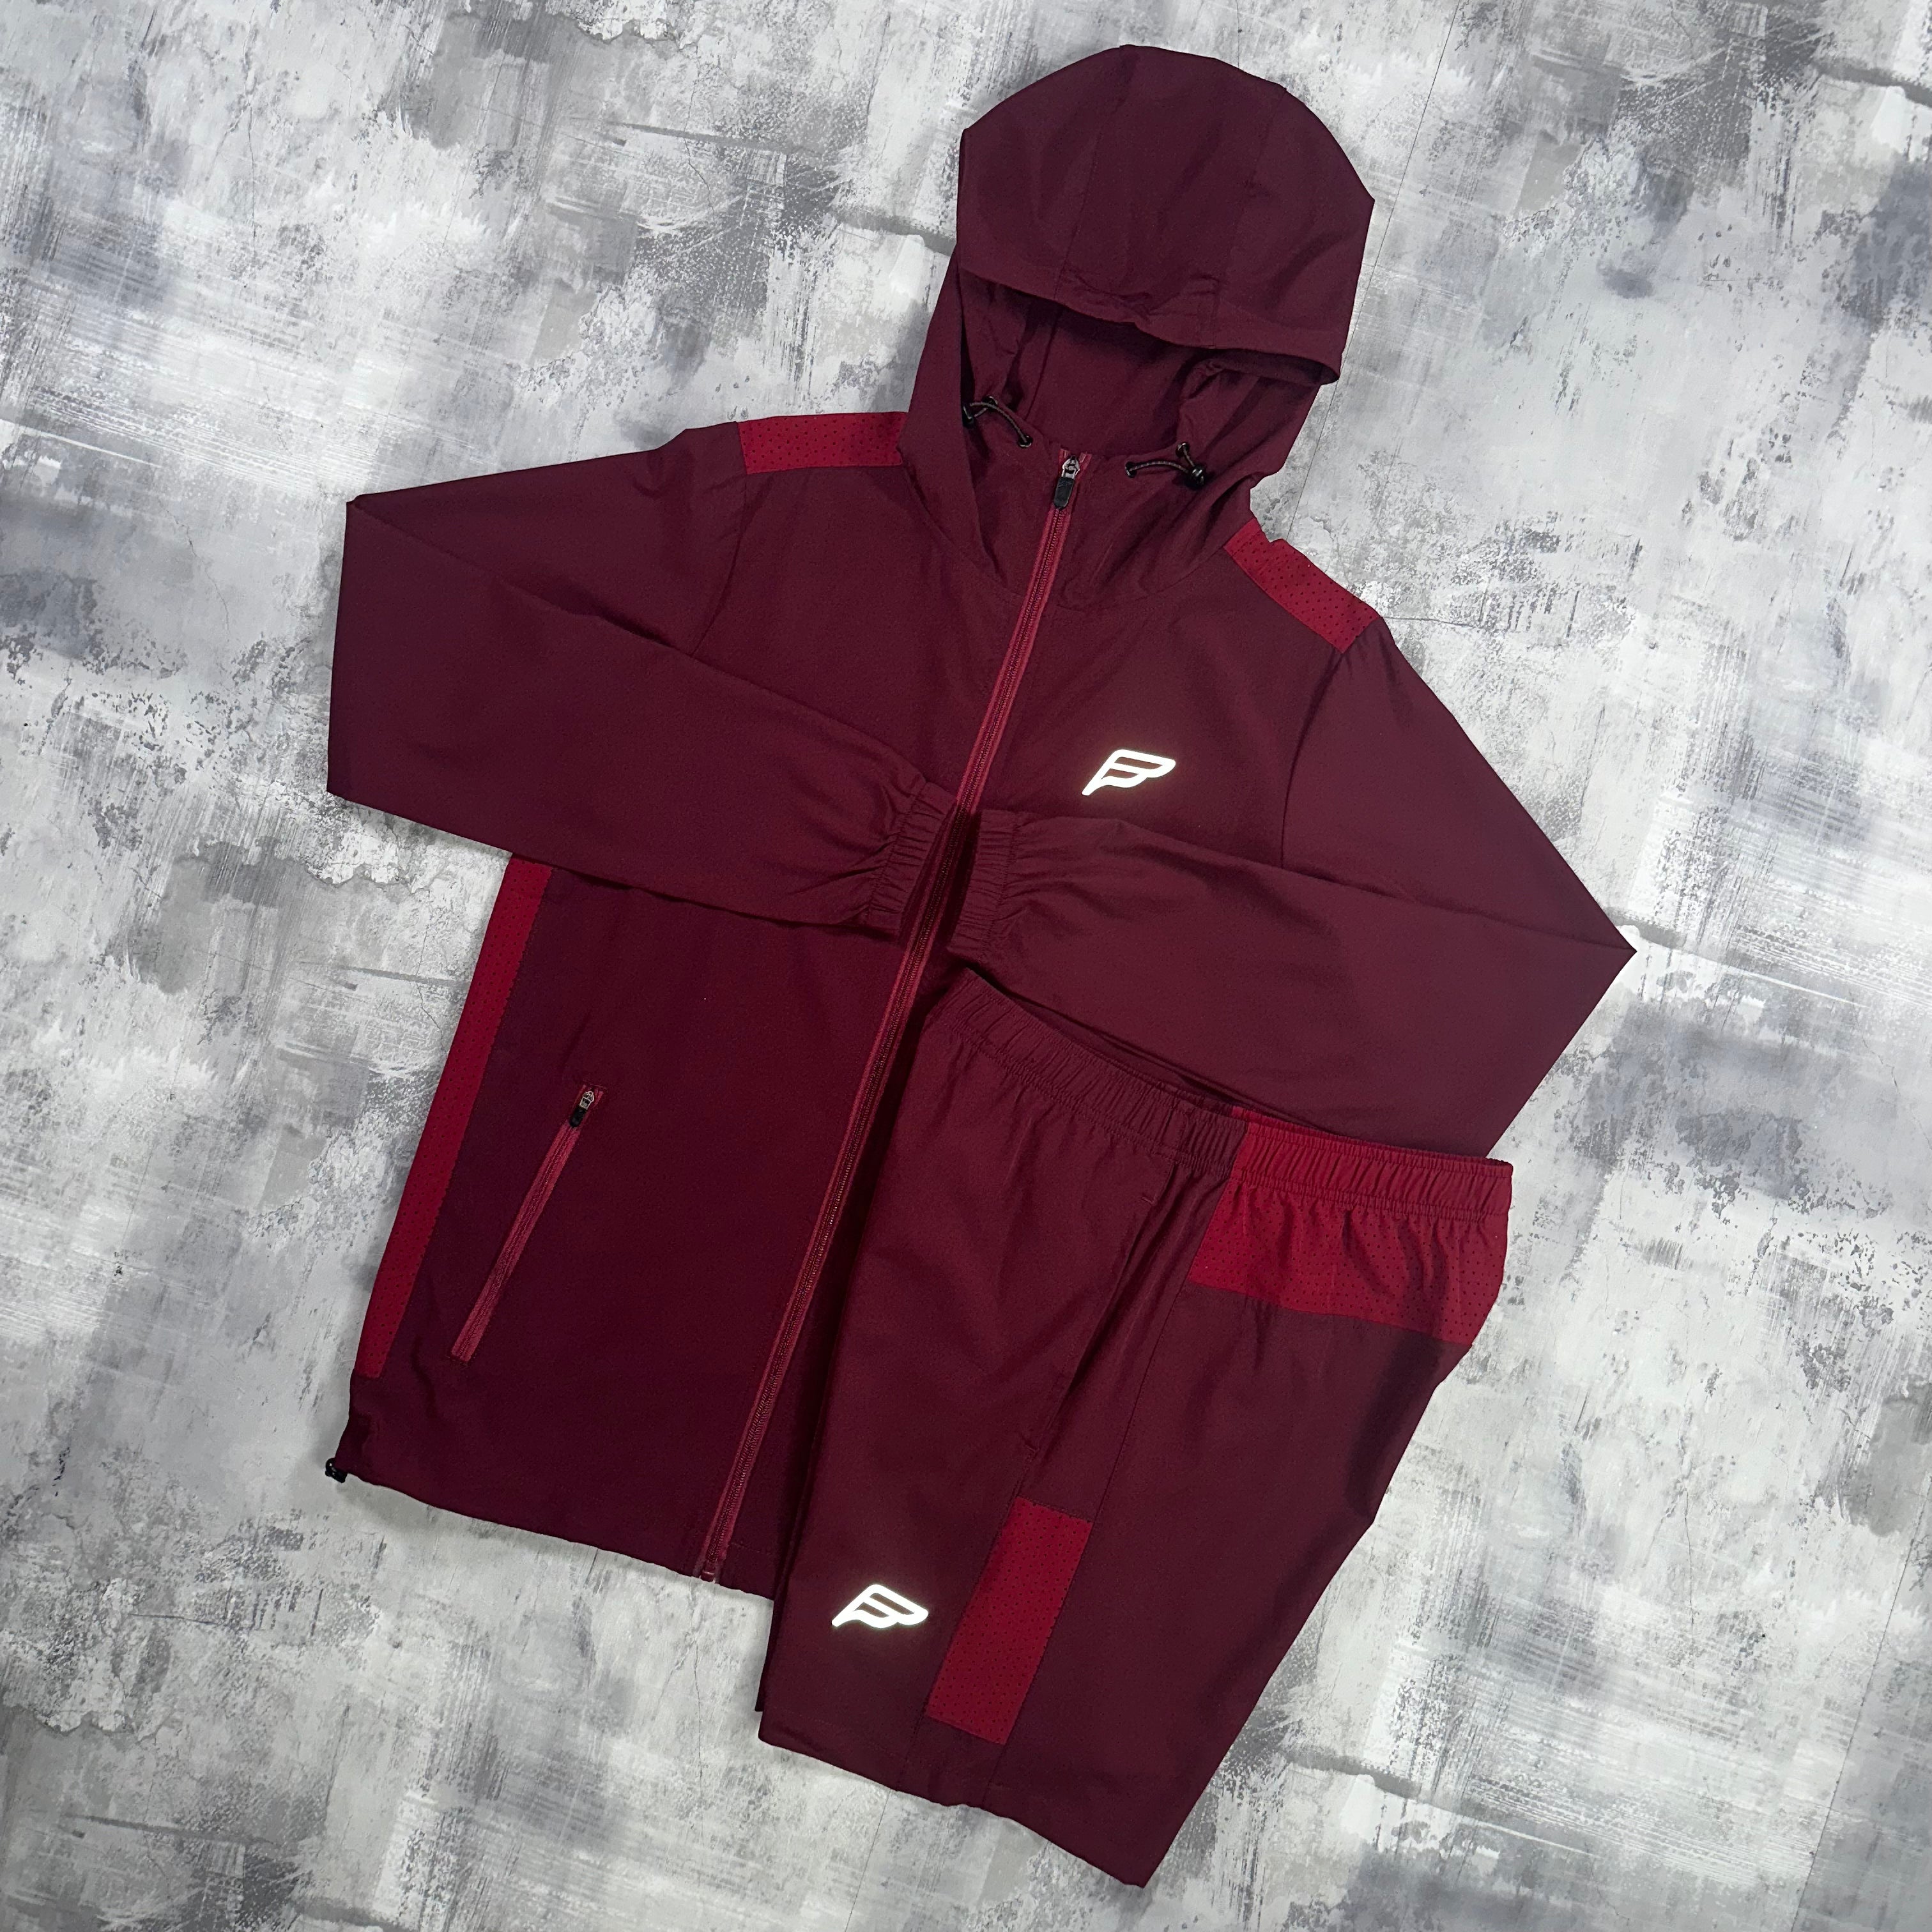 Frequency Active Vent Set Maroon - Jacket & Shorts